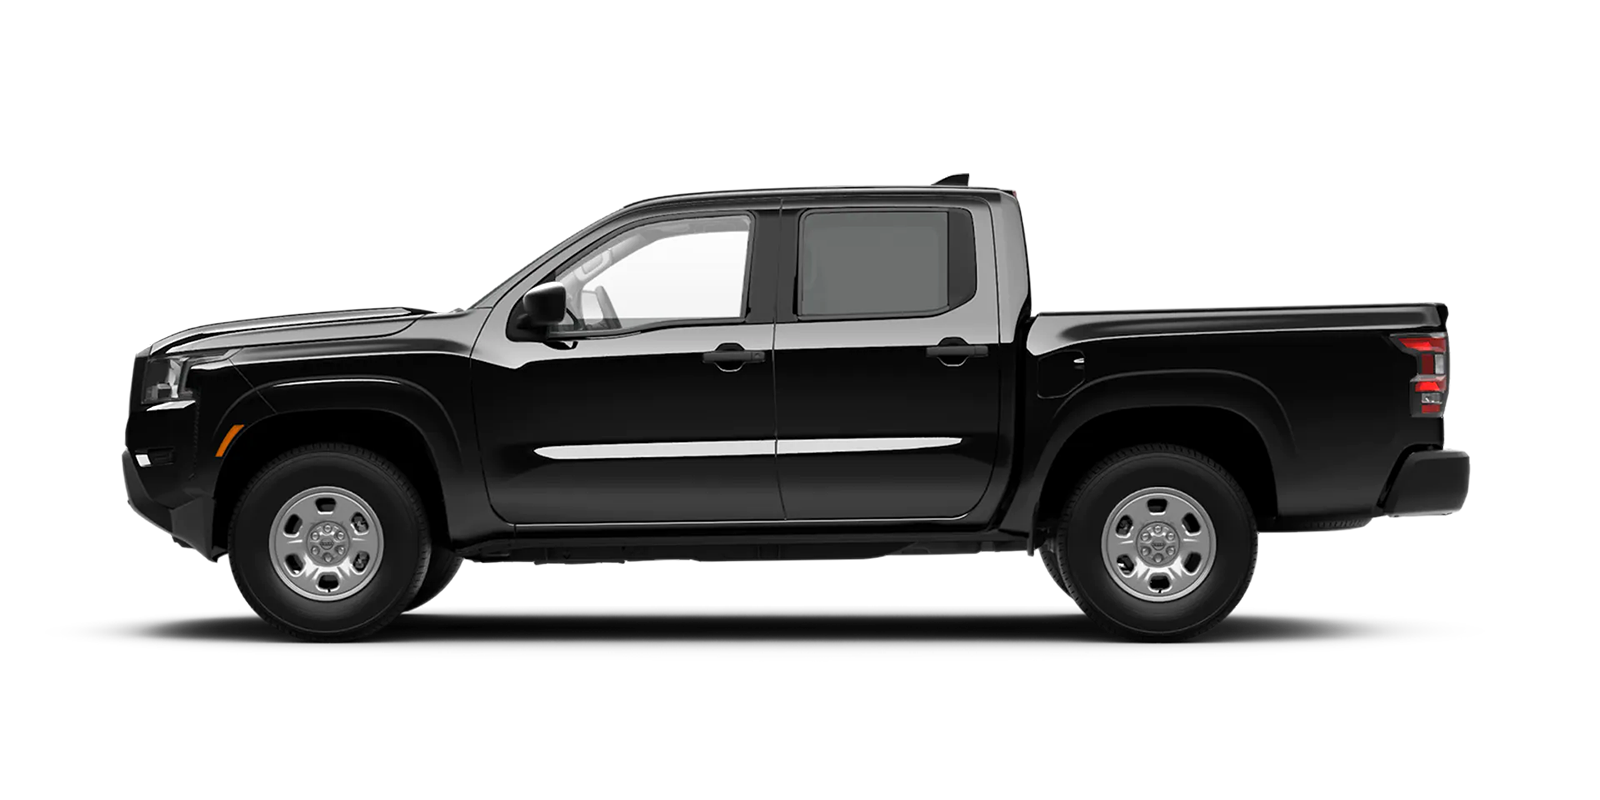 2022 Frontier Crew Cab S 4x2 in Super Black | Wallace Nissan of Kingsport in Kingsport TN